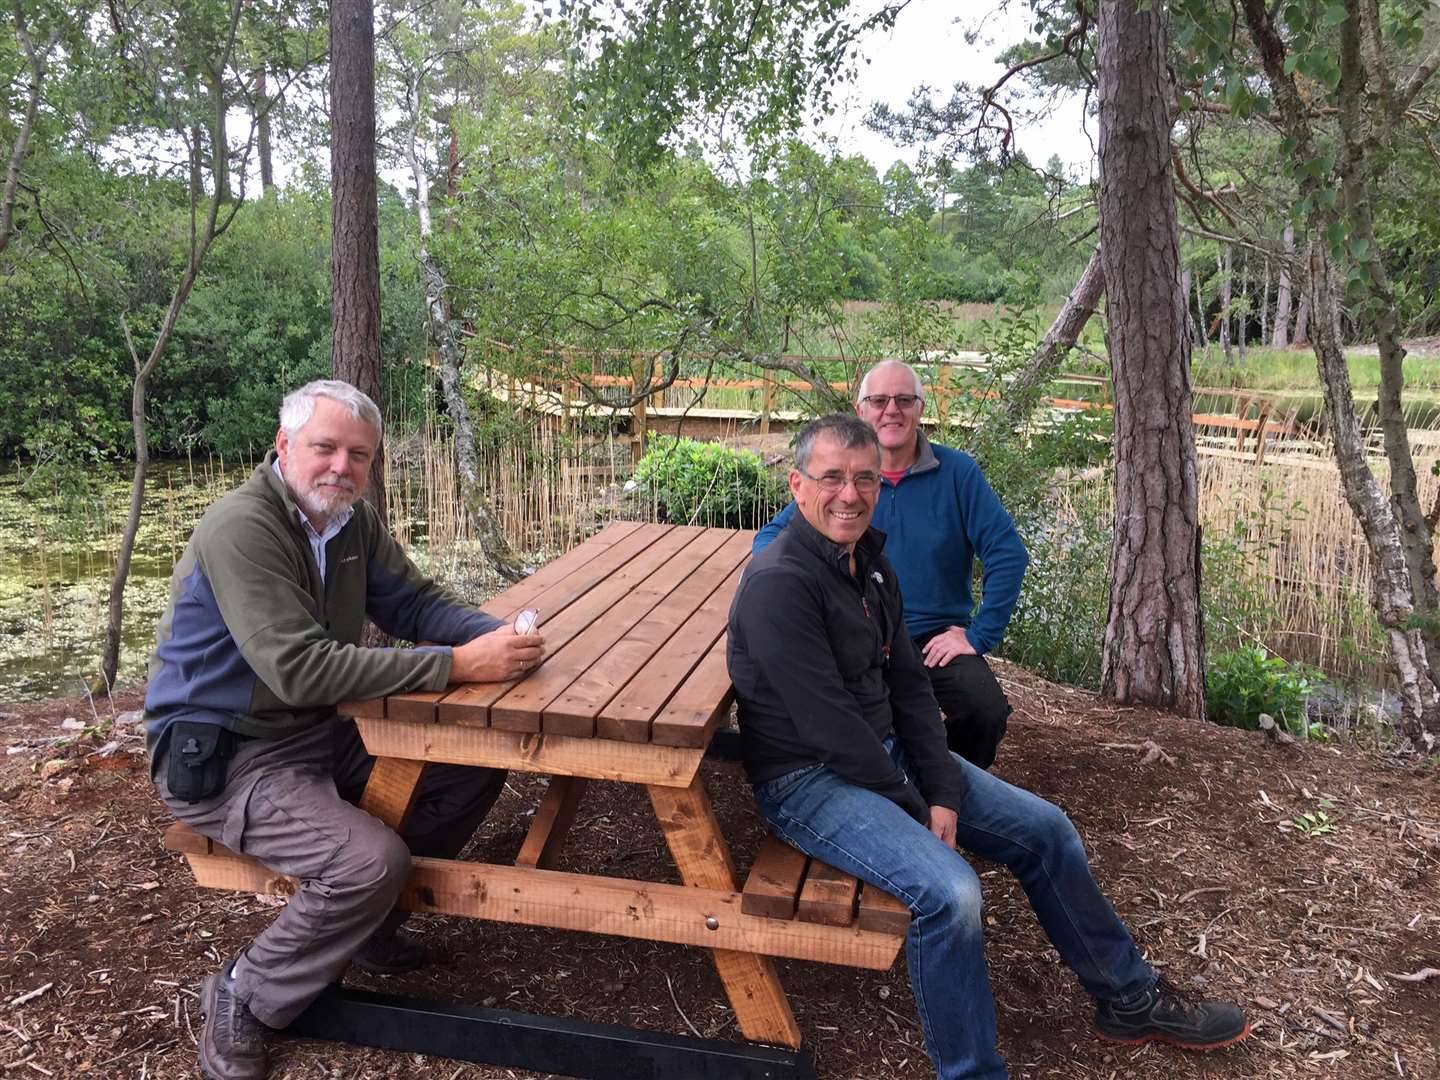 Friends of Blairs Loch Brian Higgs, Carlo Miele and Mike Sutherland at the picnic table.